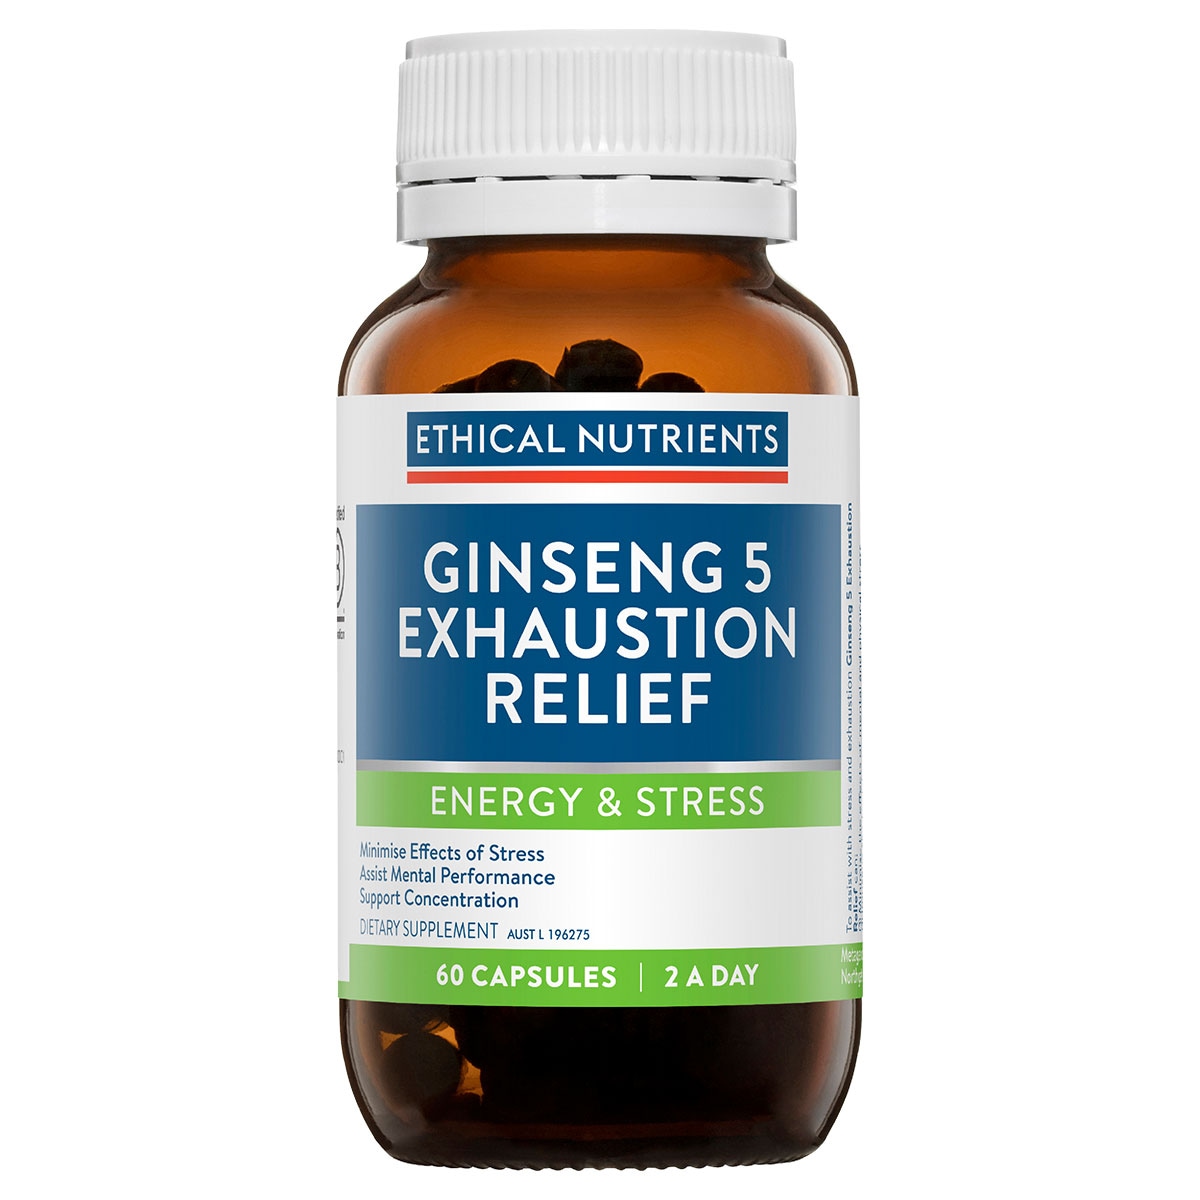 Ginseng for stress relief